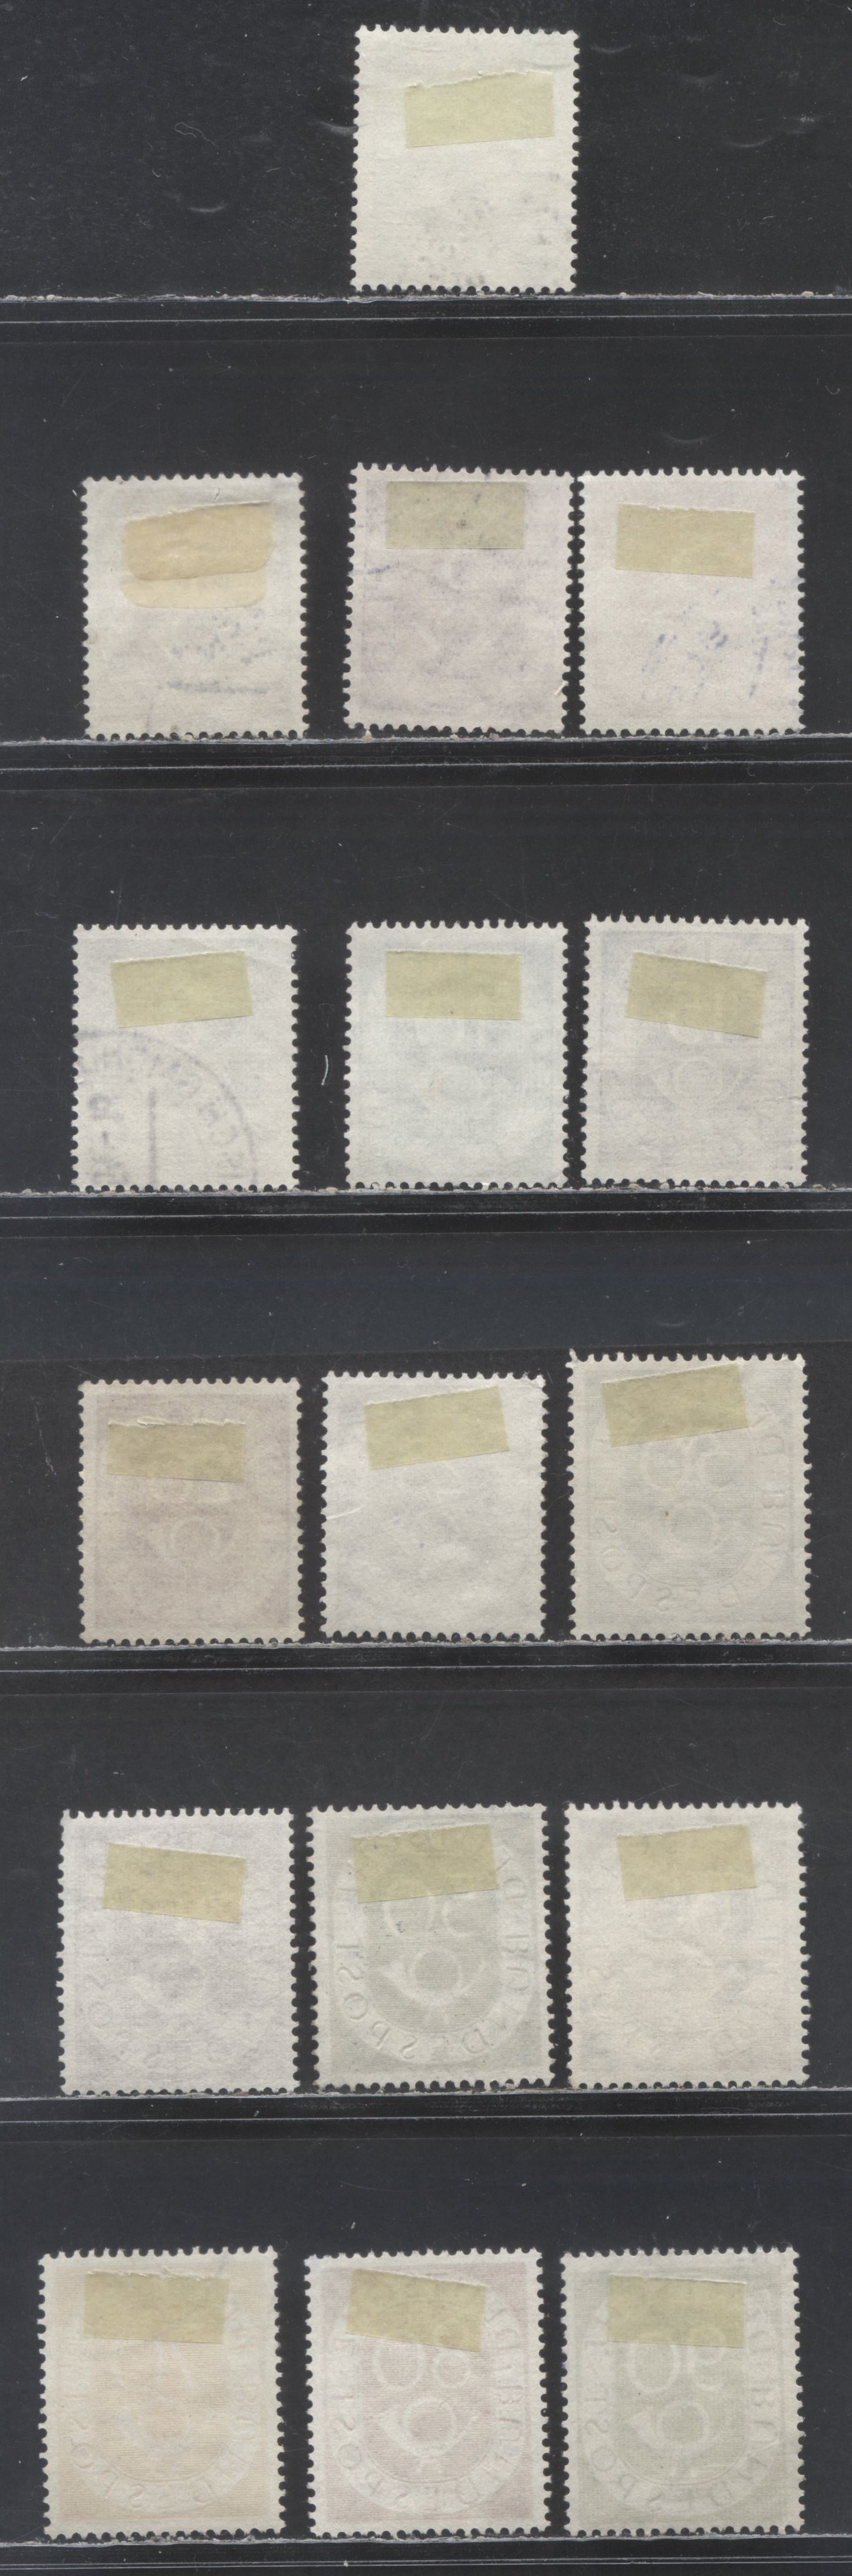 Lot 19 Germany SC#670-685 1951-1952 Posthorns Definitives, 16 Very Fine Used Singles, Click on Listing to See ALL Pictures, 2022 Scott Cat. $40.9